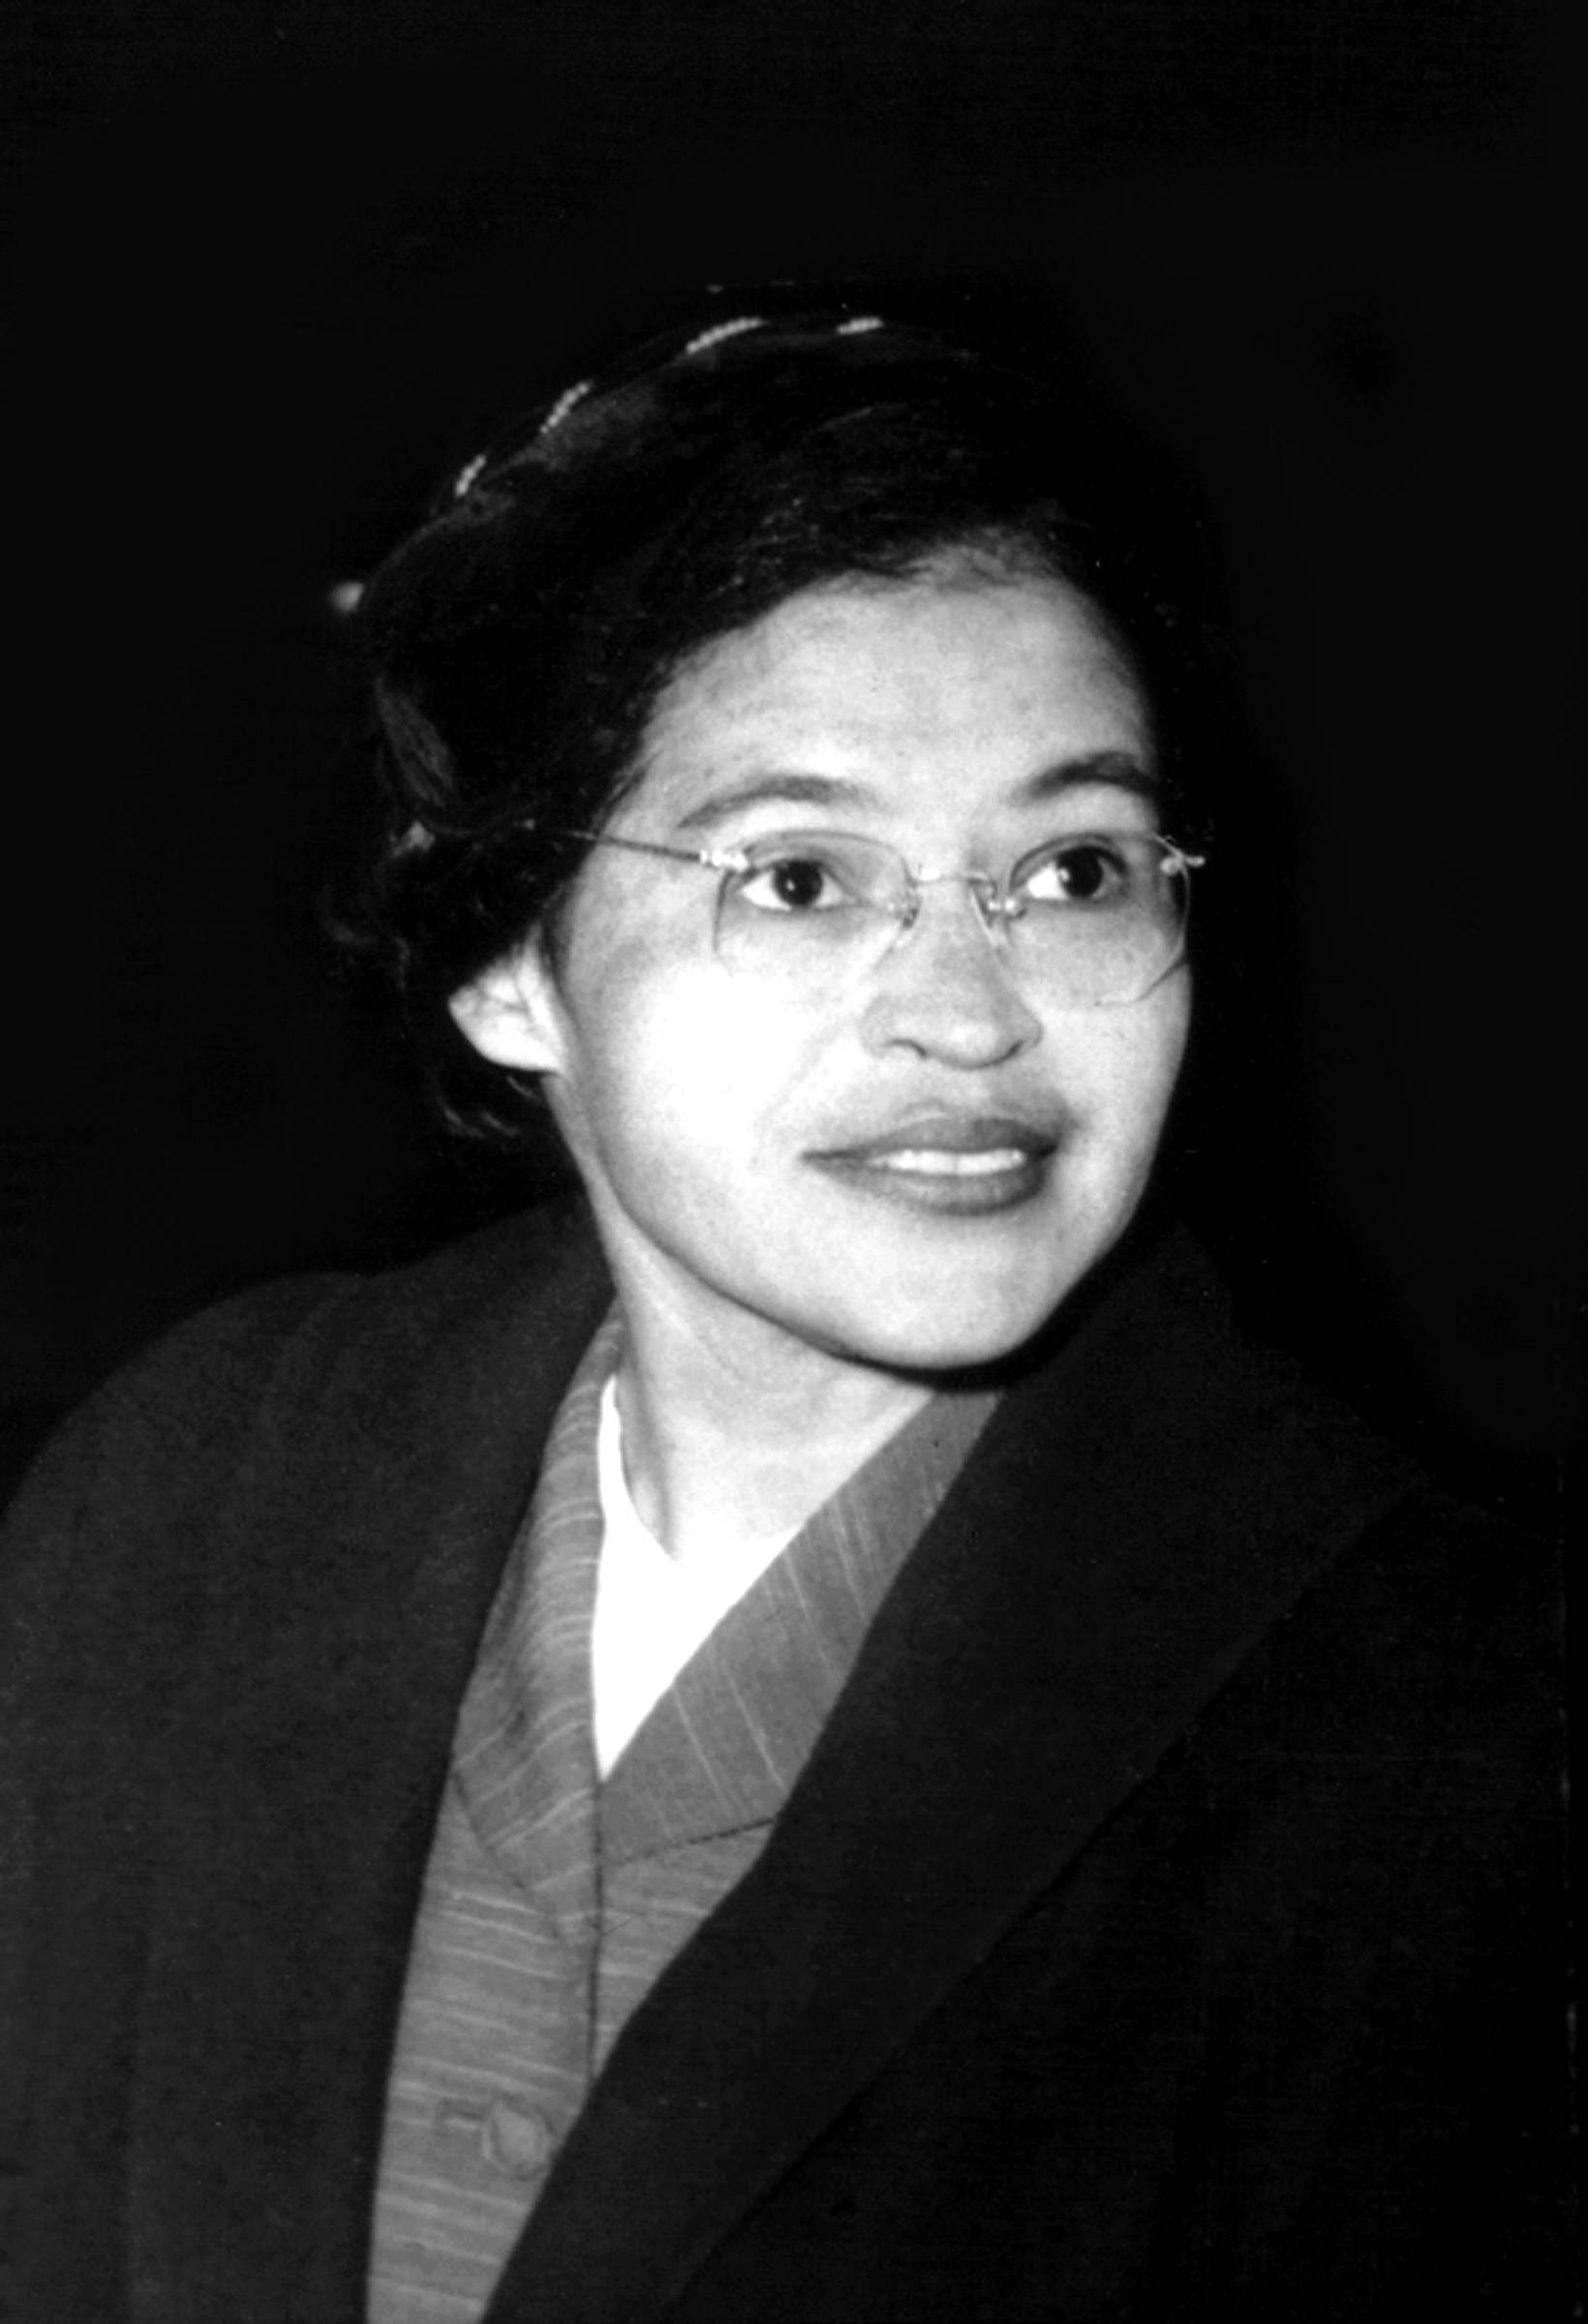 Before Rosa Parks, There Were Others